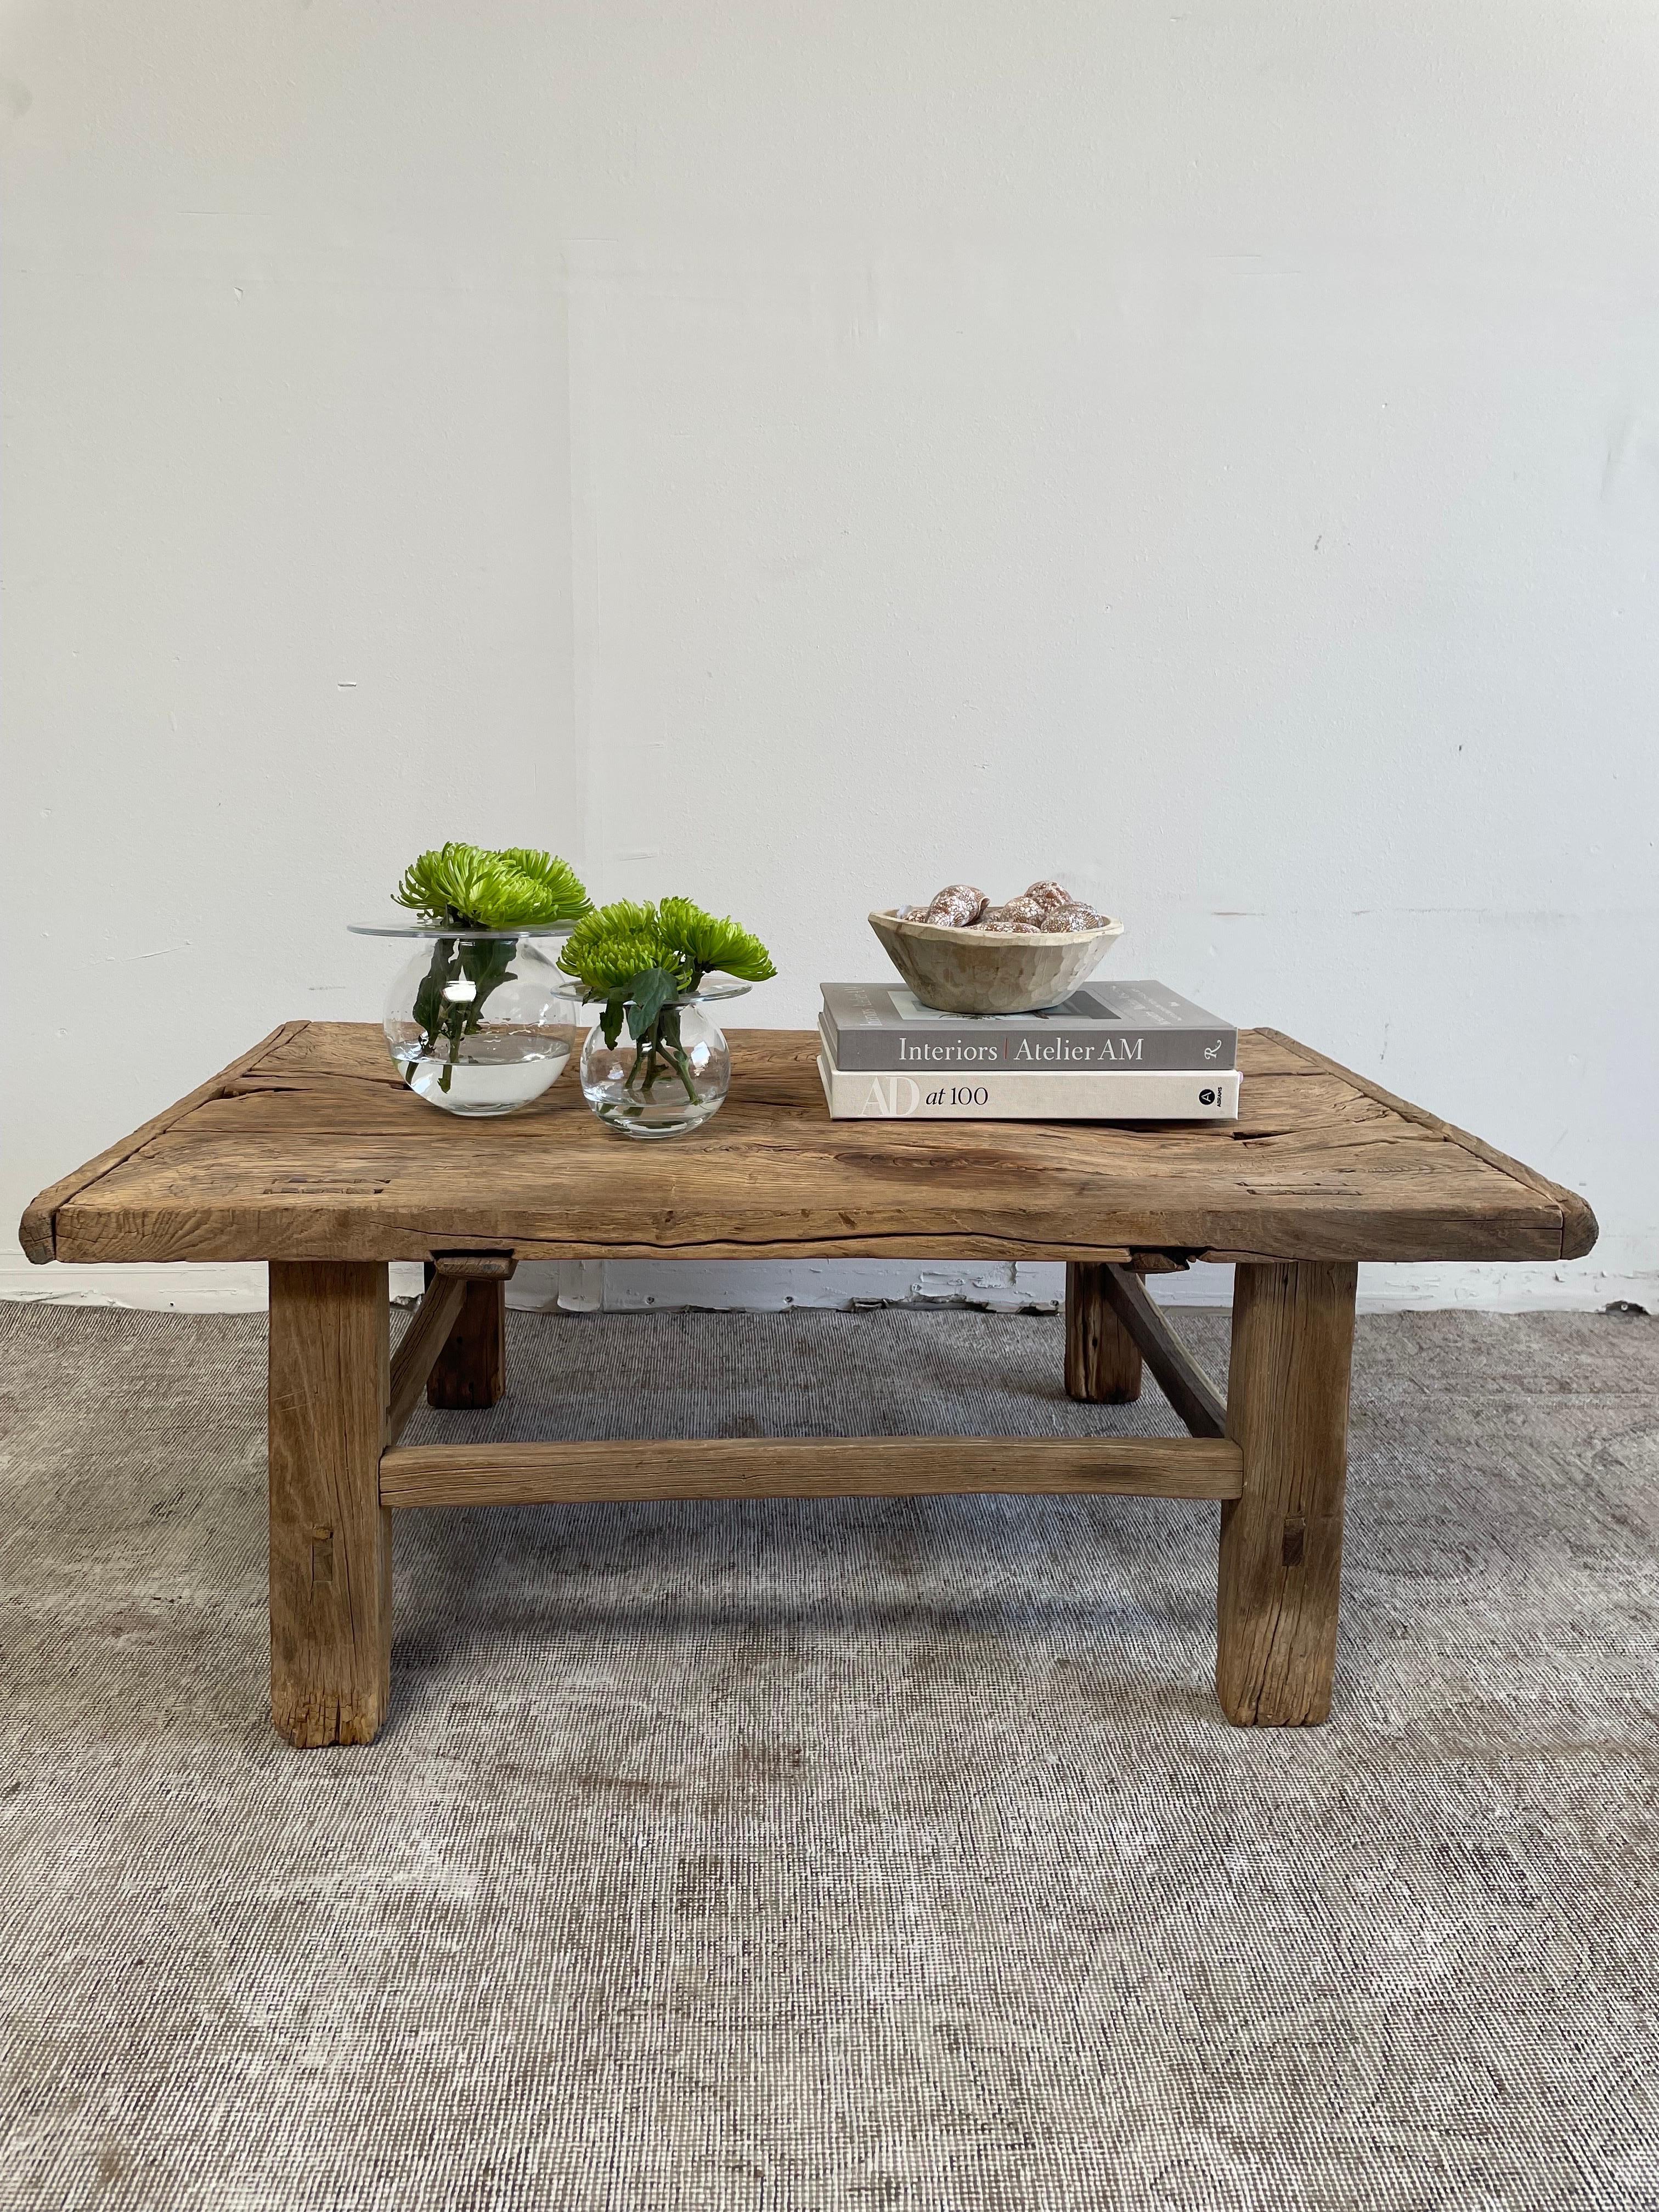 Vintage Antique Elm Wood coffee table with beautiful antique weathered patina top
These are the real vintage antique elm wood coffee table! Beautiful antique patina, with weathering and age, these are solid and sturdy ready for daily use, use as a